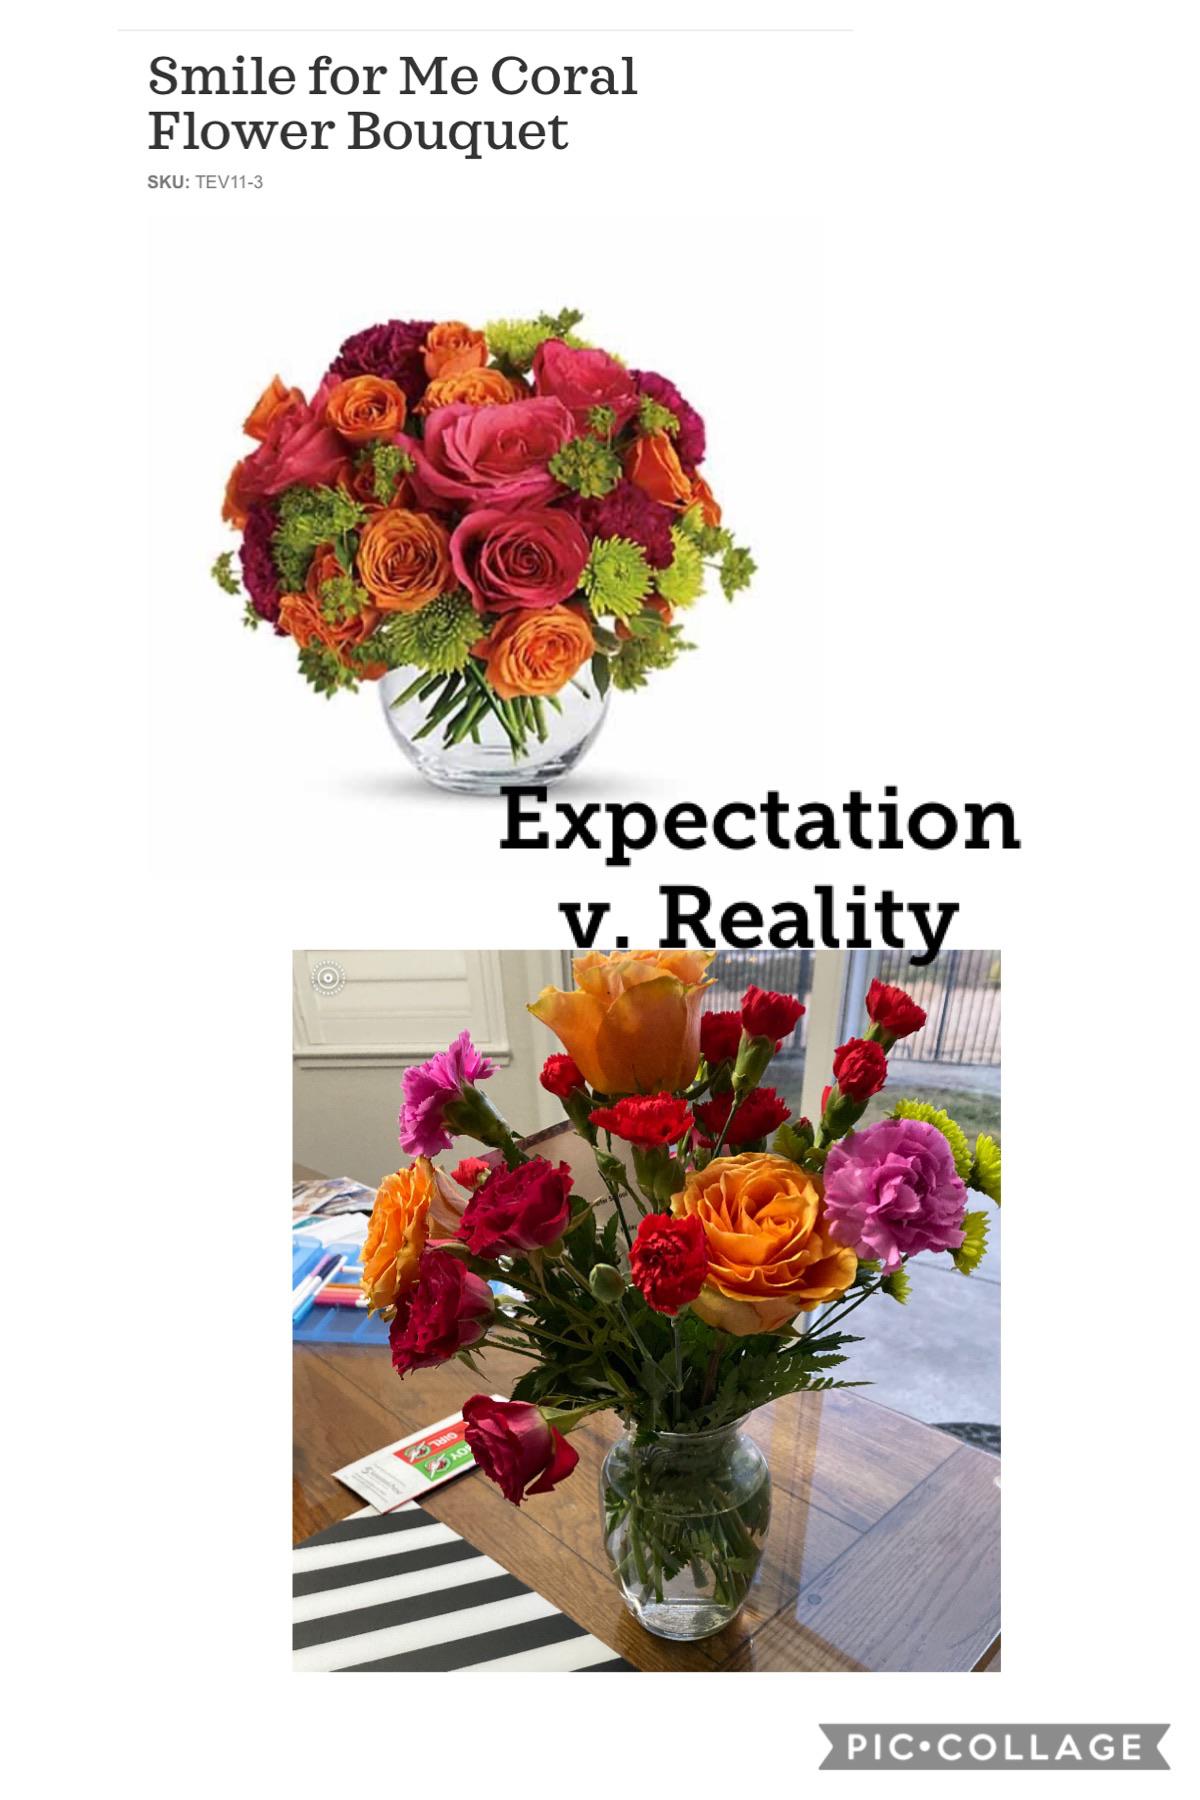 flower bouquet - Smile for Me Coral Flower Bouquet Sku TEV113 Expectation v. Reality Pic.Collage